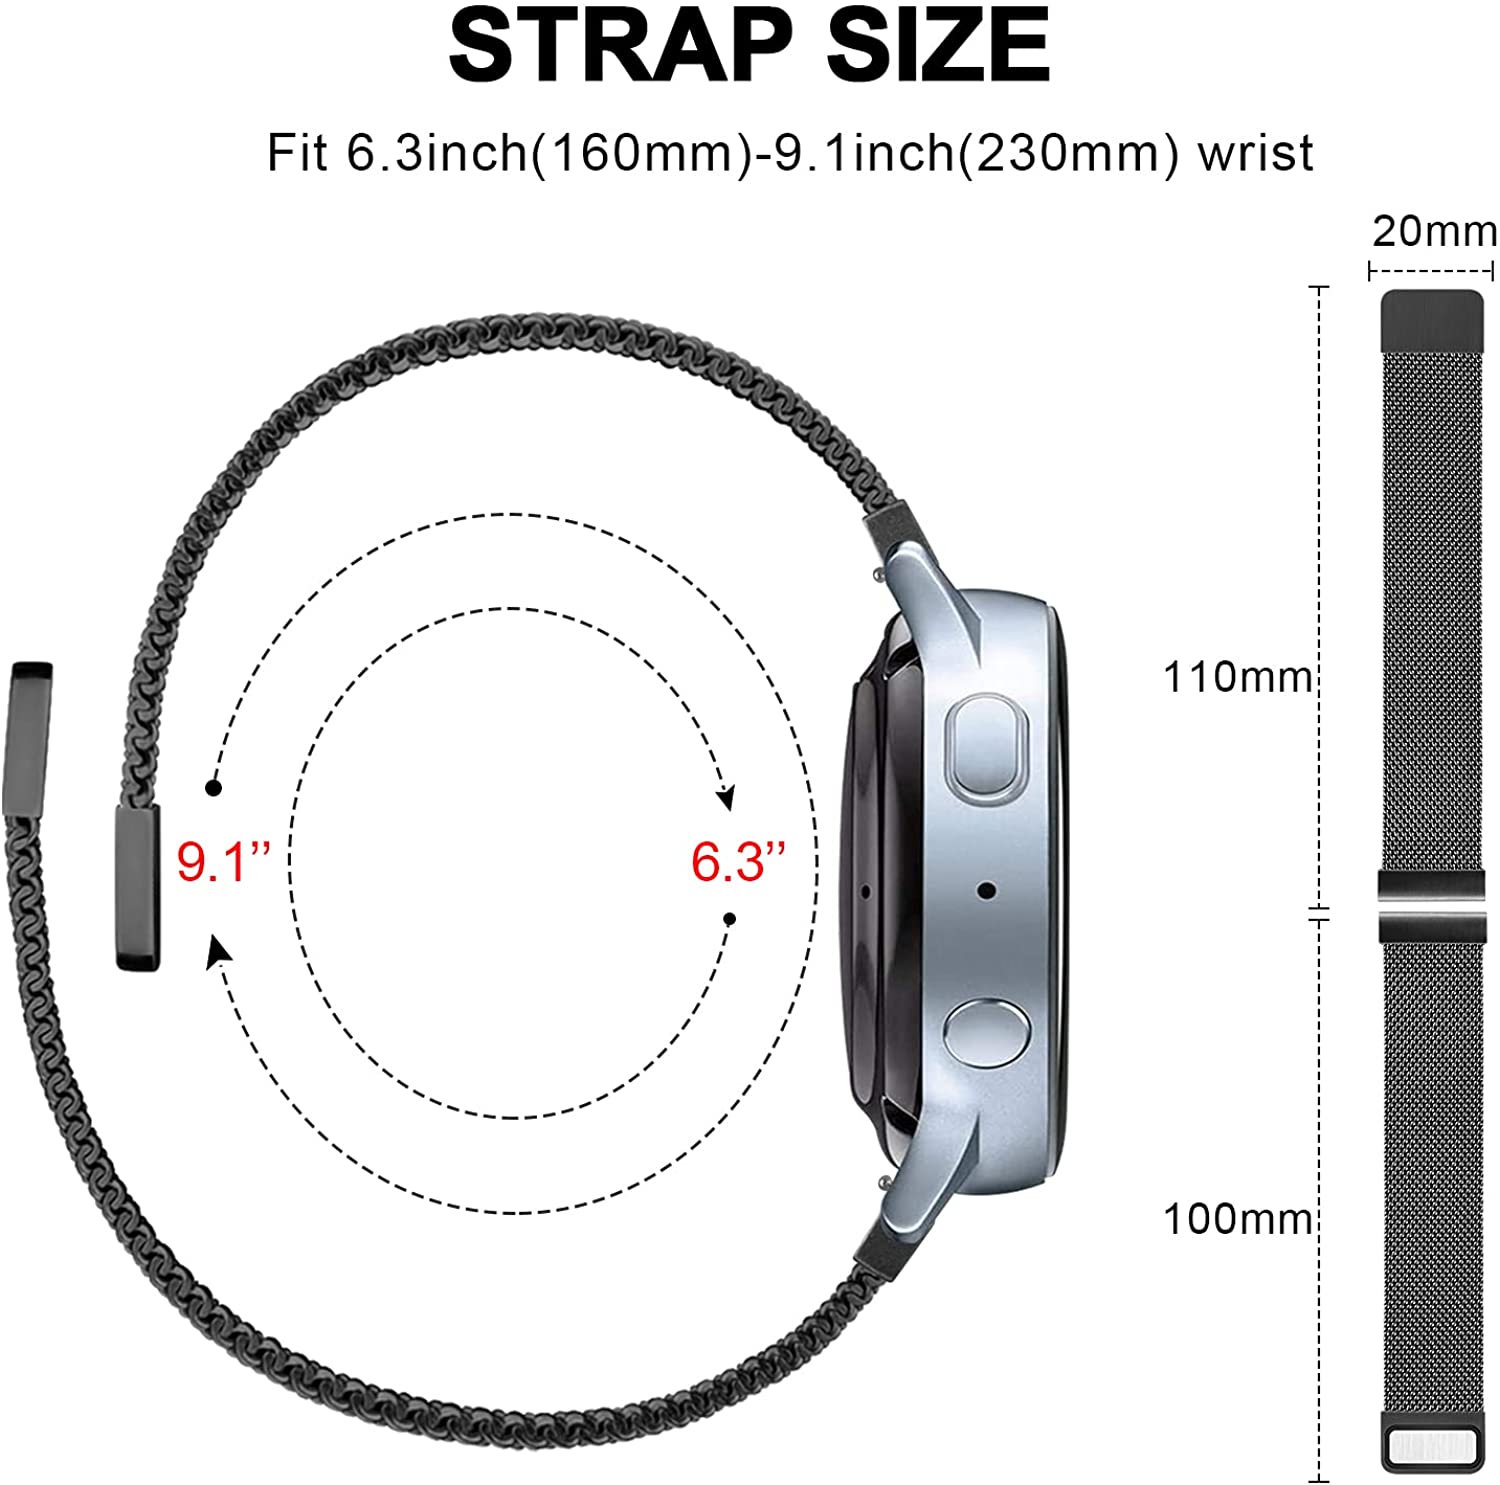 Compatible for Amazfit GTS 3 Band, YOUkei Quick Release Stainless Steel  Metal Replacement Straps Compatible with Amazfit GTS 2 / GTS 2 Mini/GTS 3